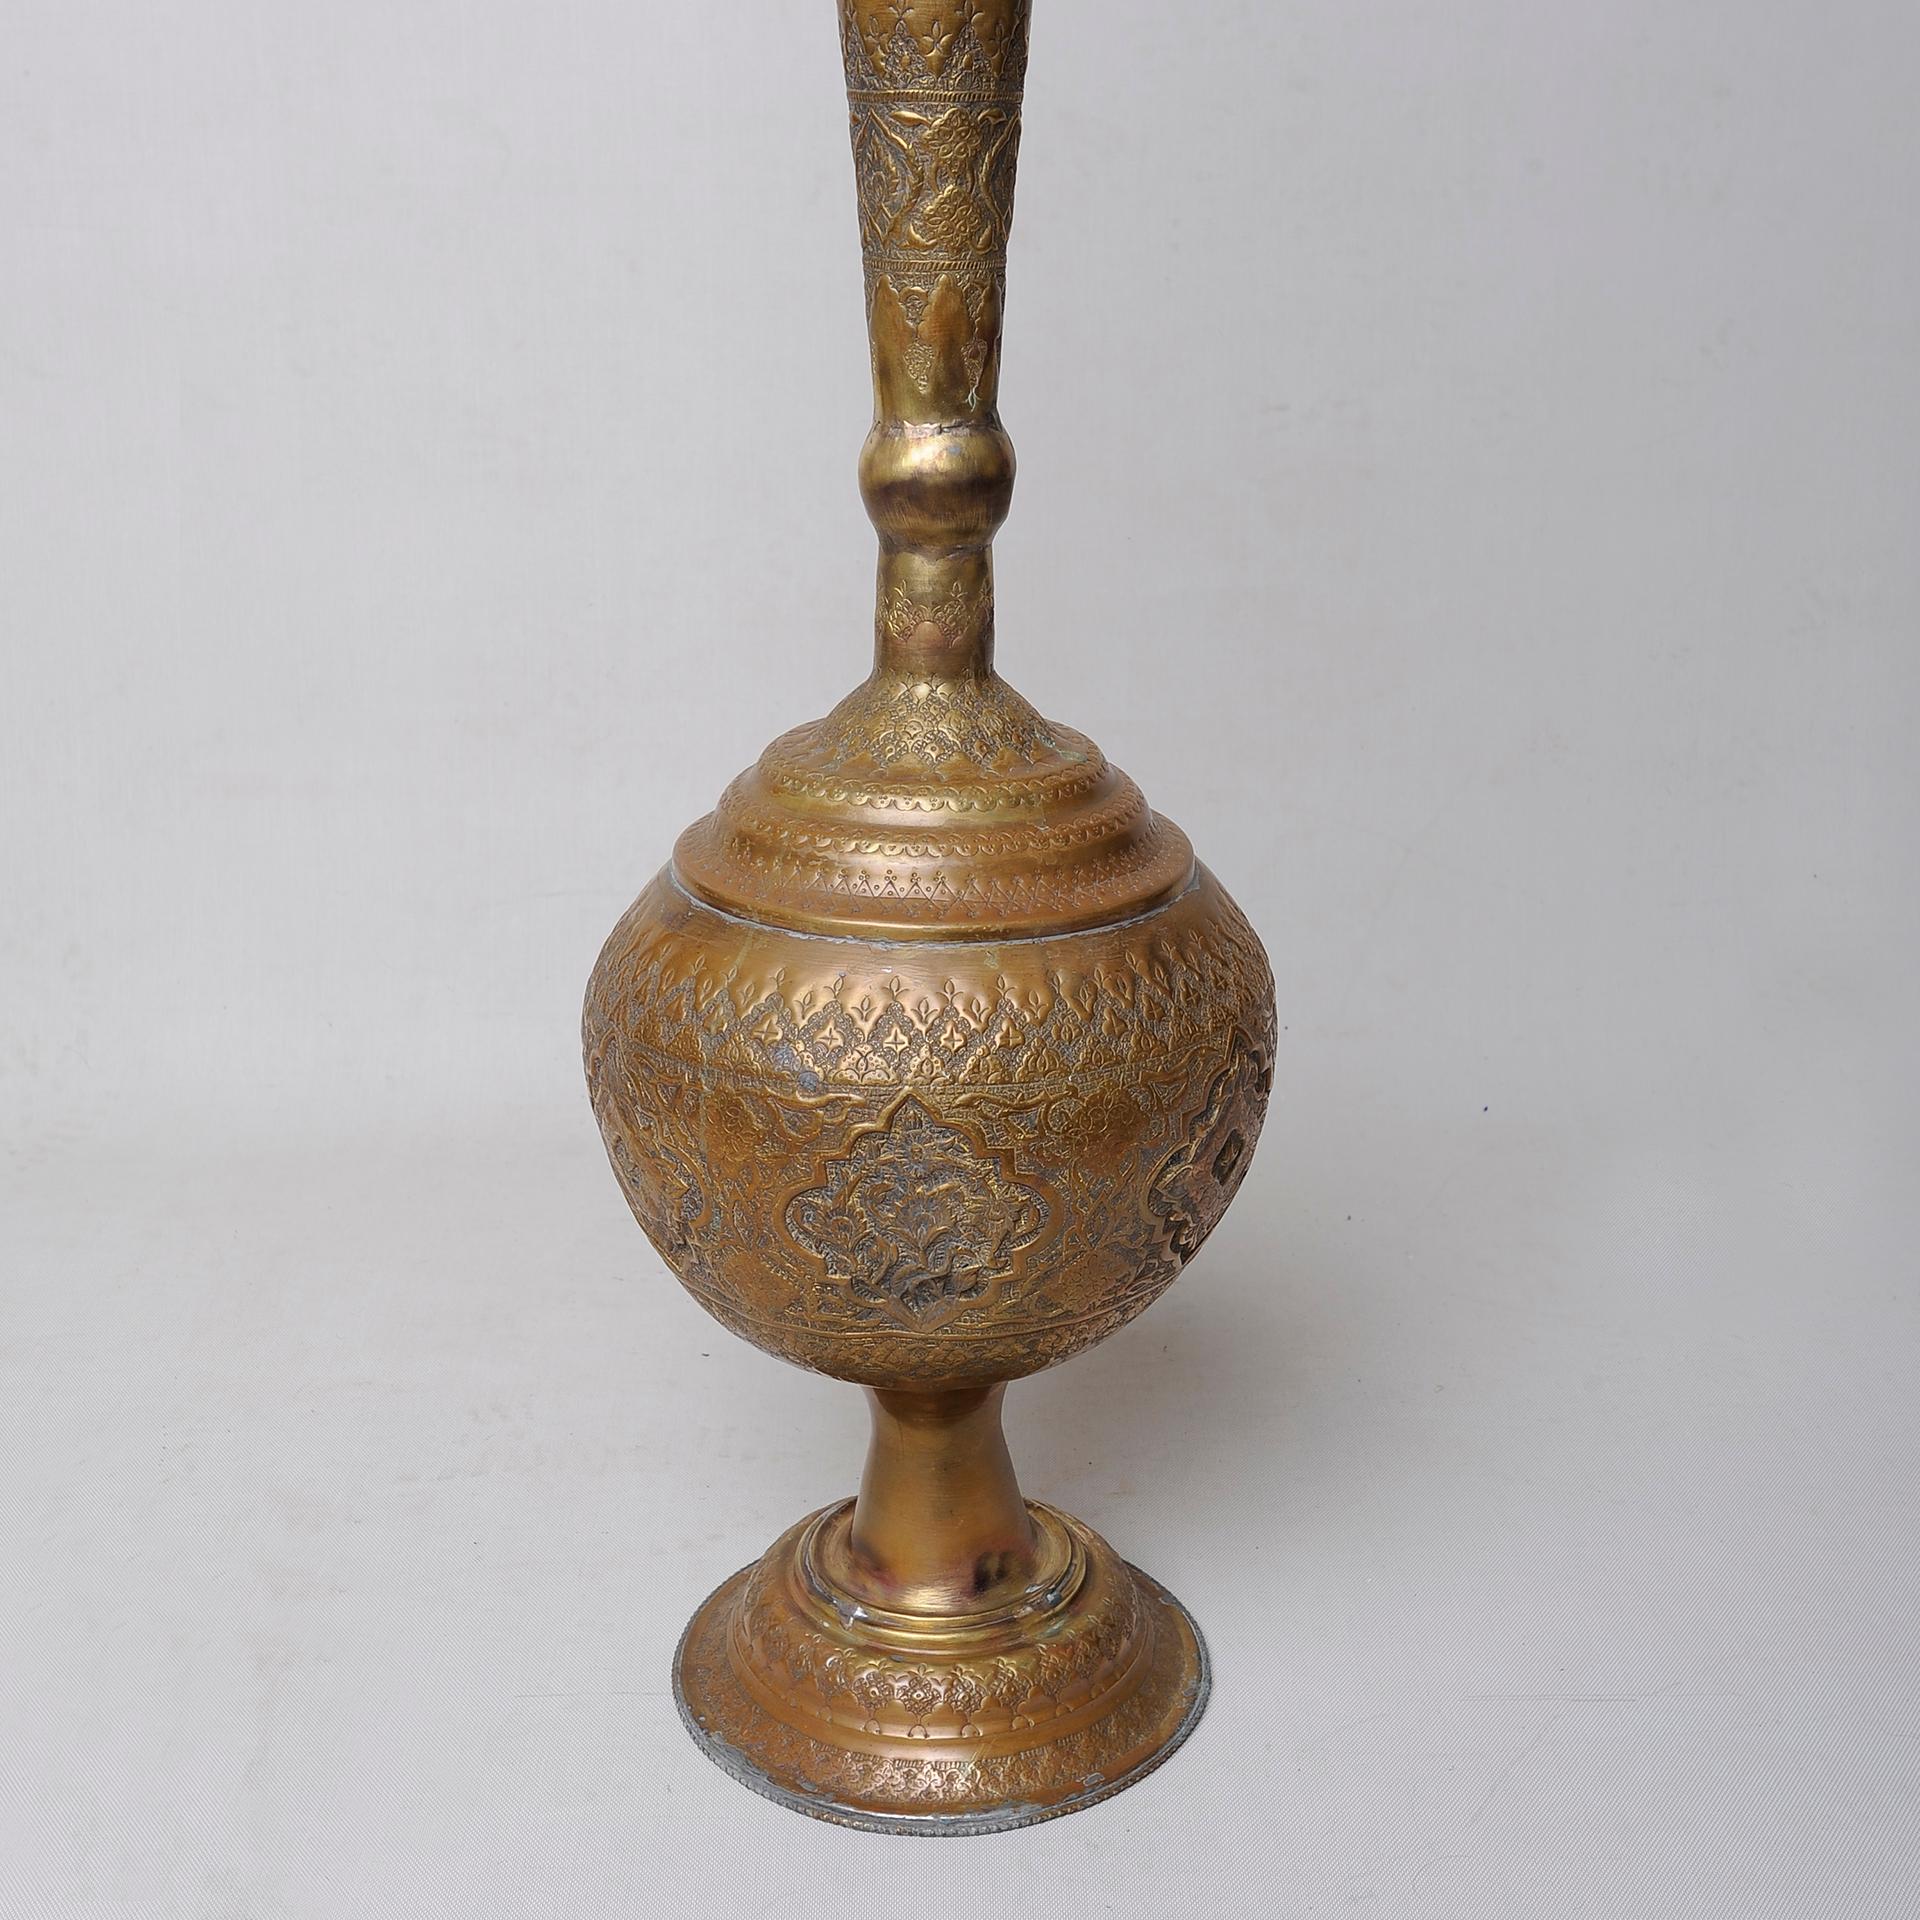 Old Moorish or Syrian style brass with fine designs. It was transformed in a table lamp, but it's so nice like that, without anything else.
Leaning on a landing: it's perfect.